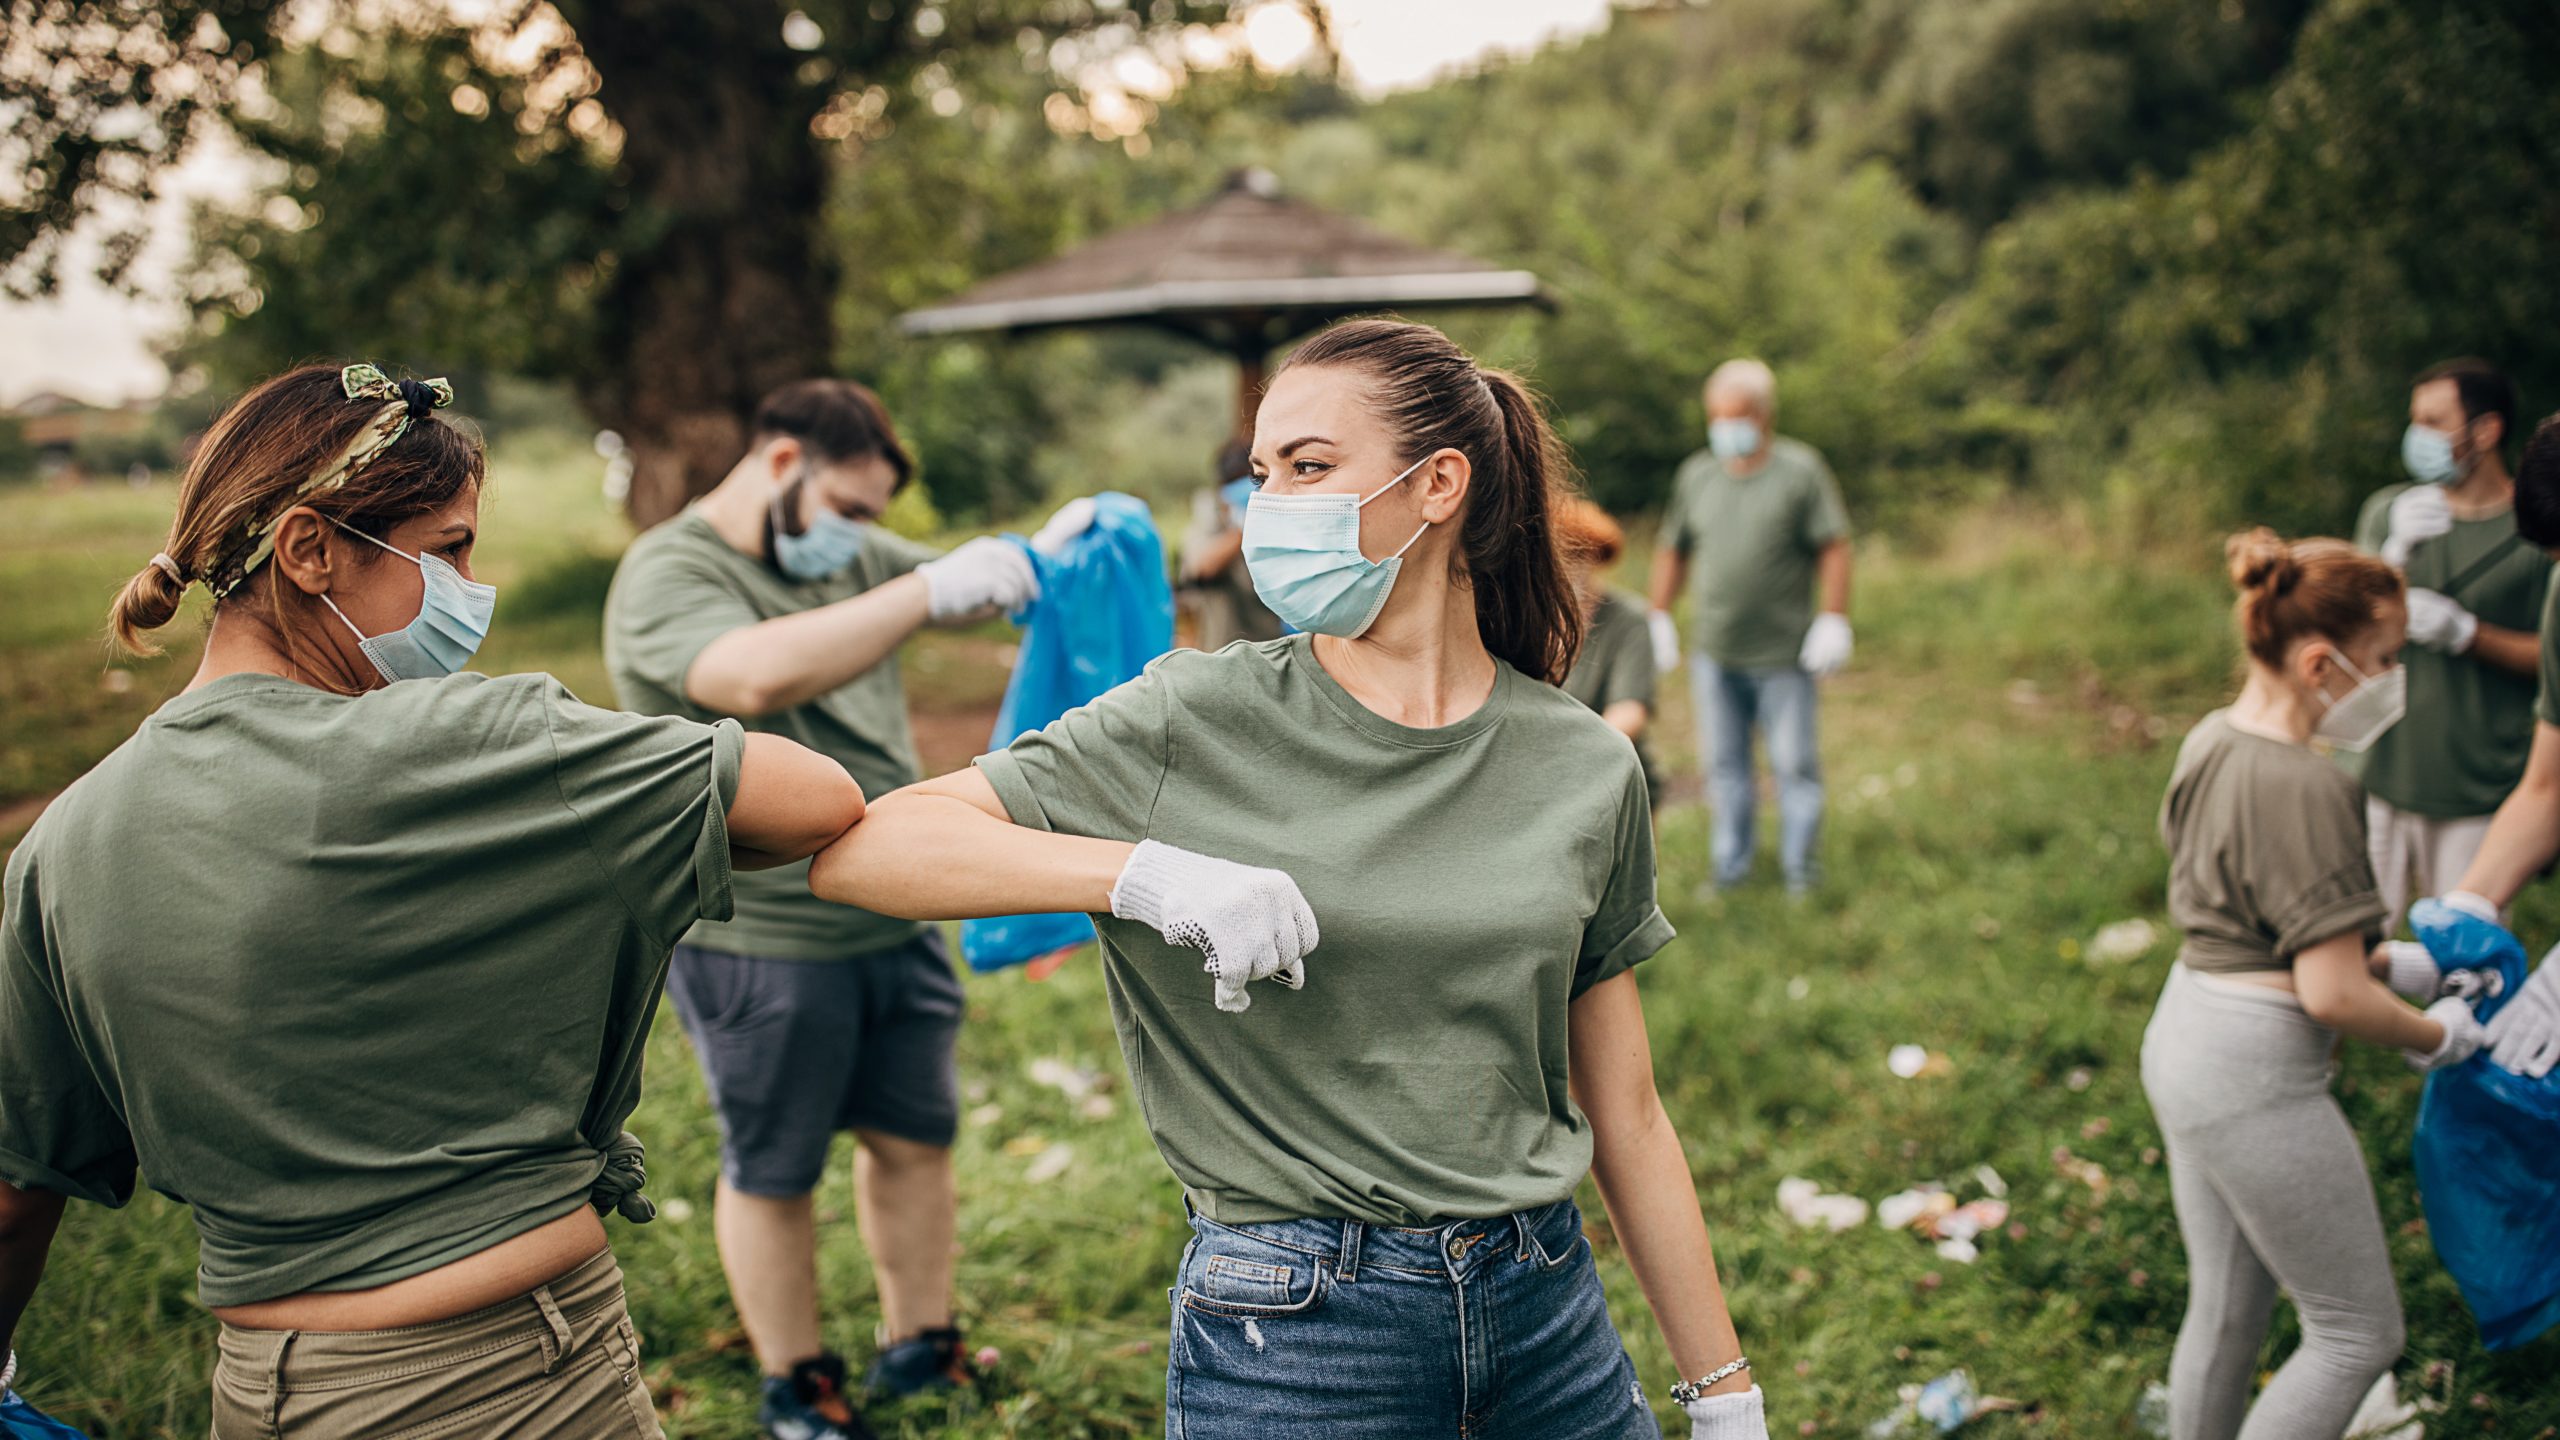 Group of volunteers with face masks cleaning a park together